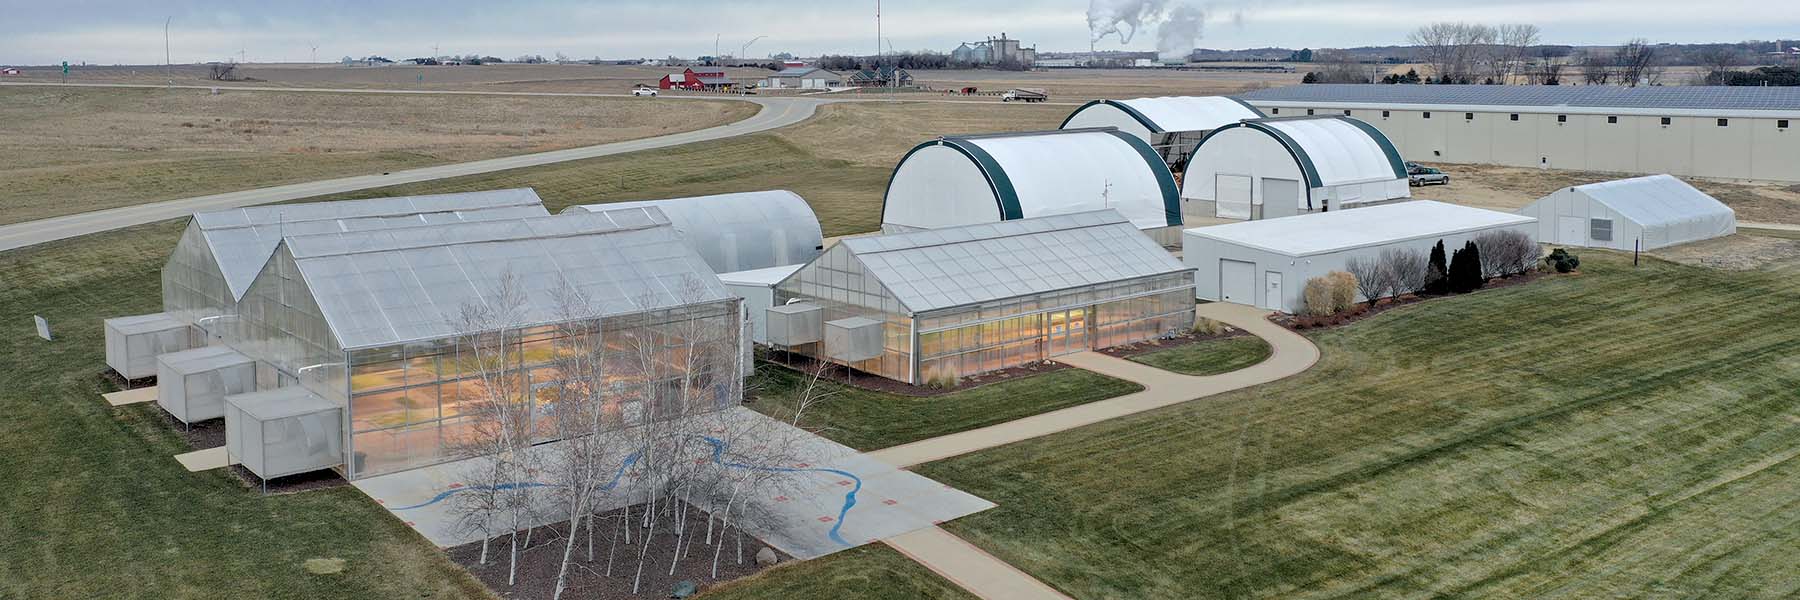 commercial greenhouse